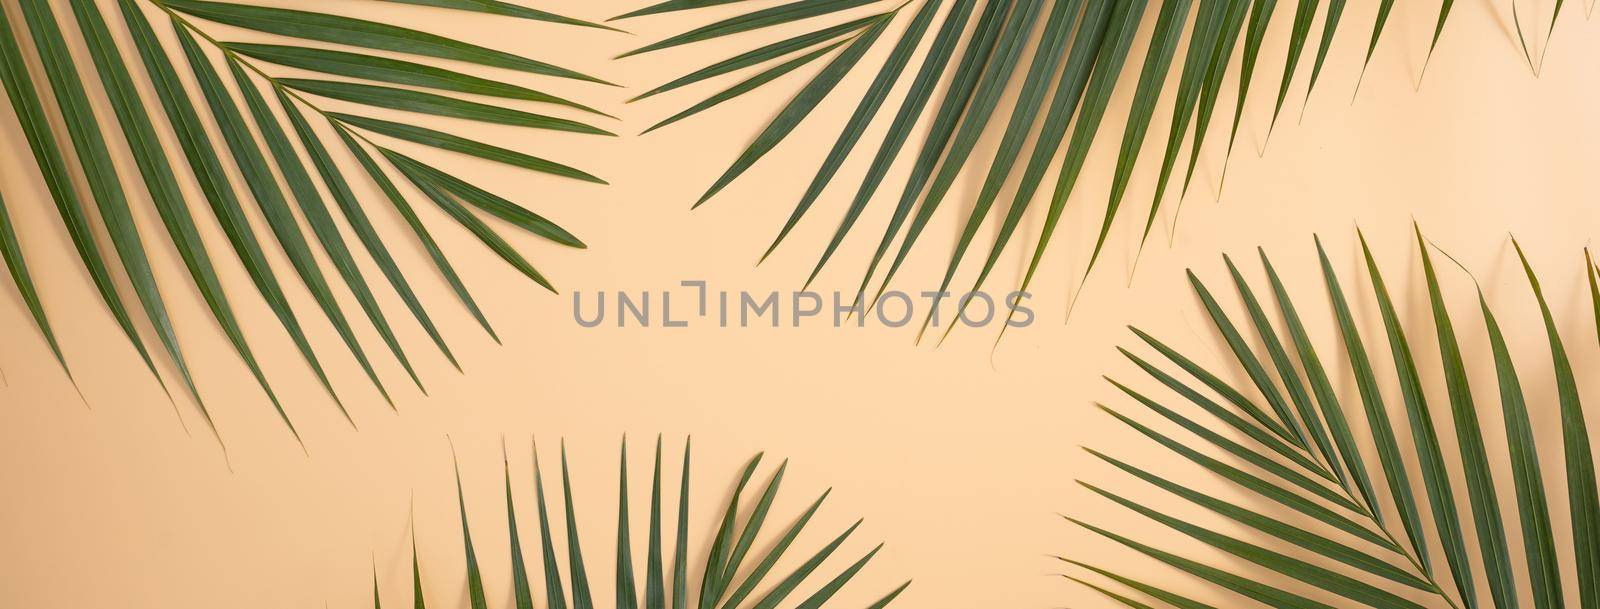 Top view of tropical palm leaves branch isolated on bright orange background with copy space.